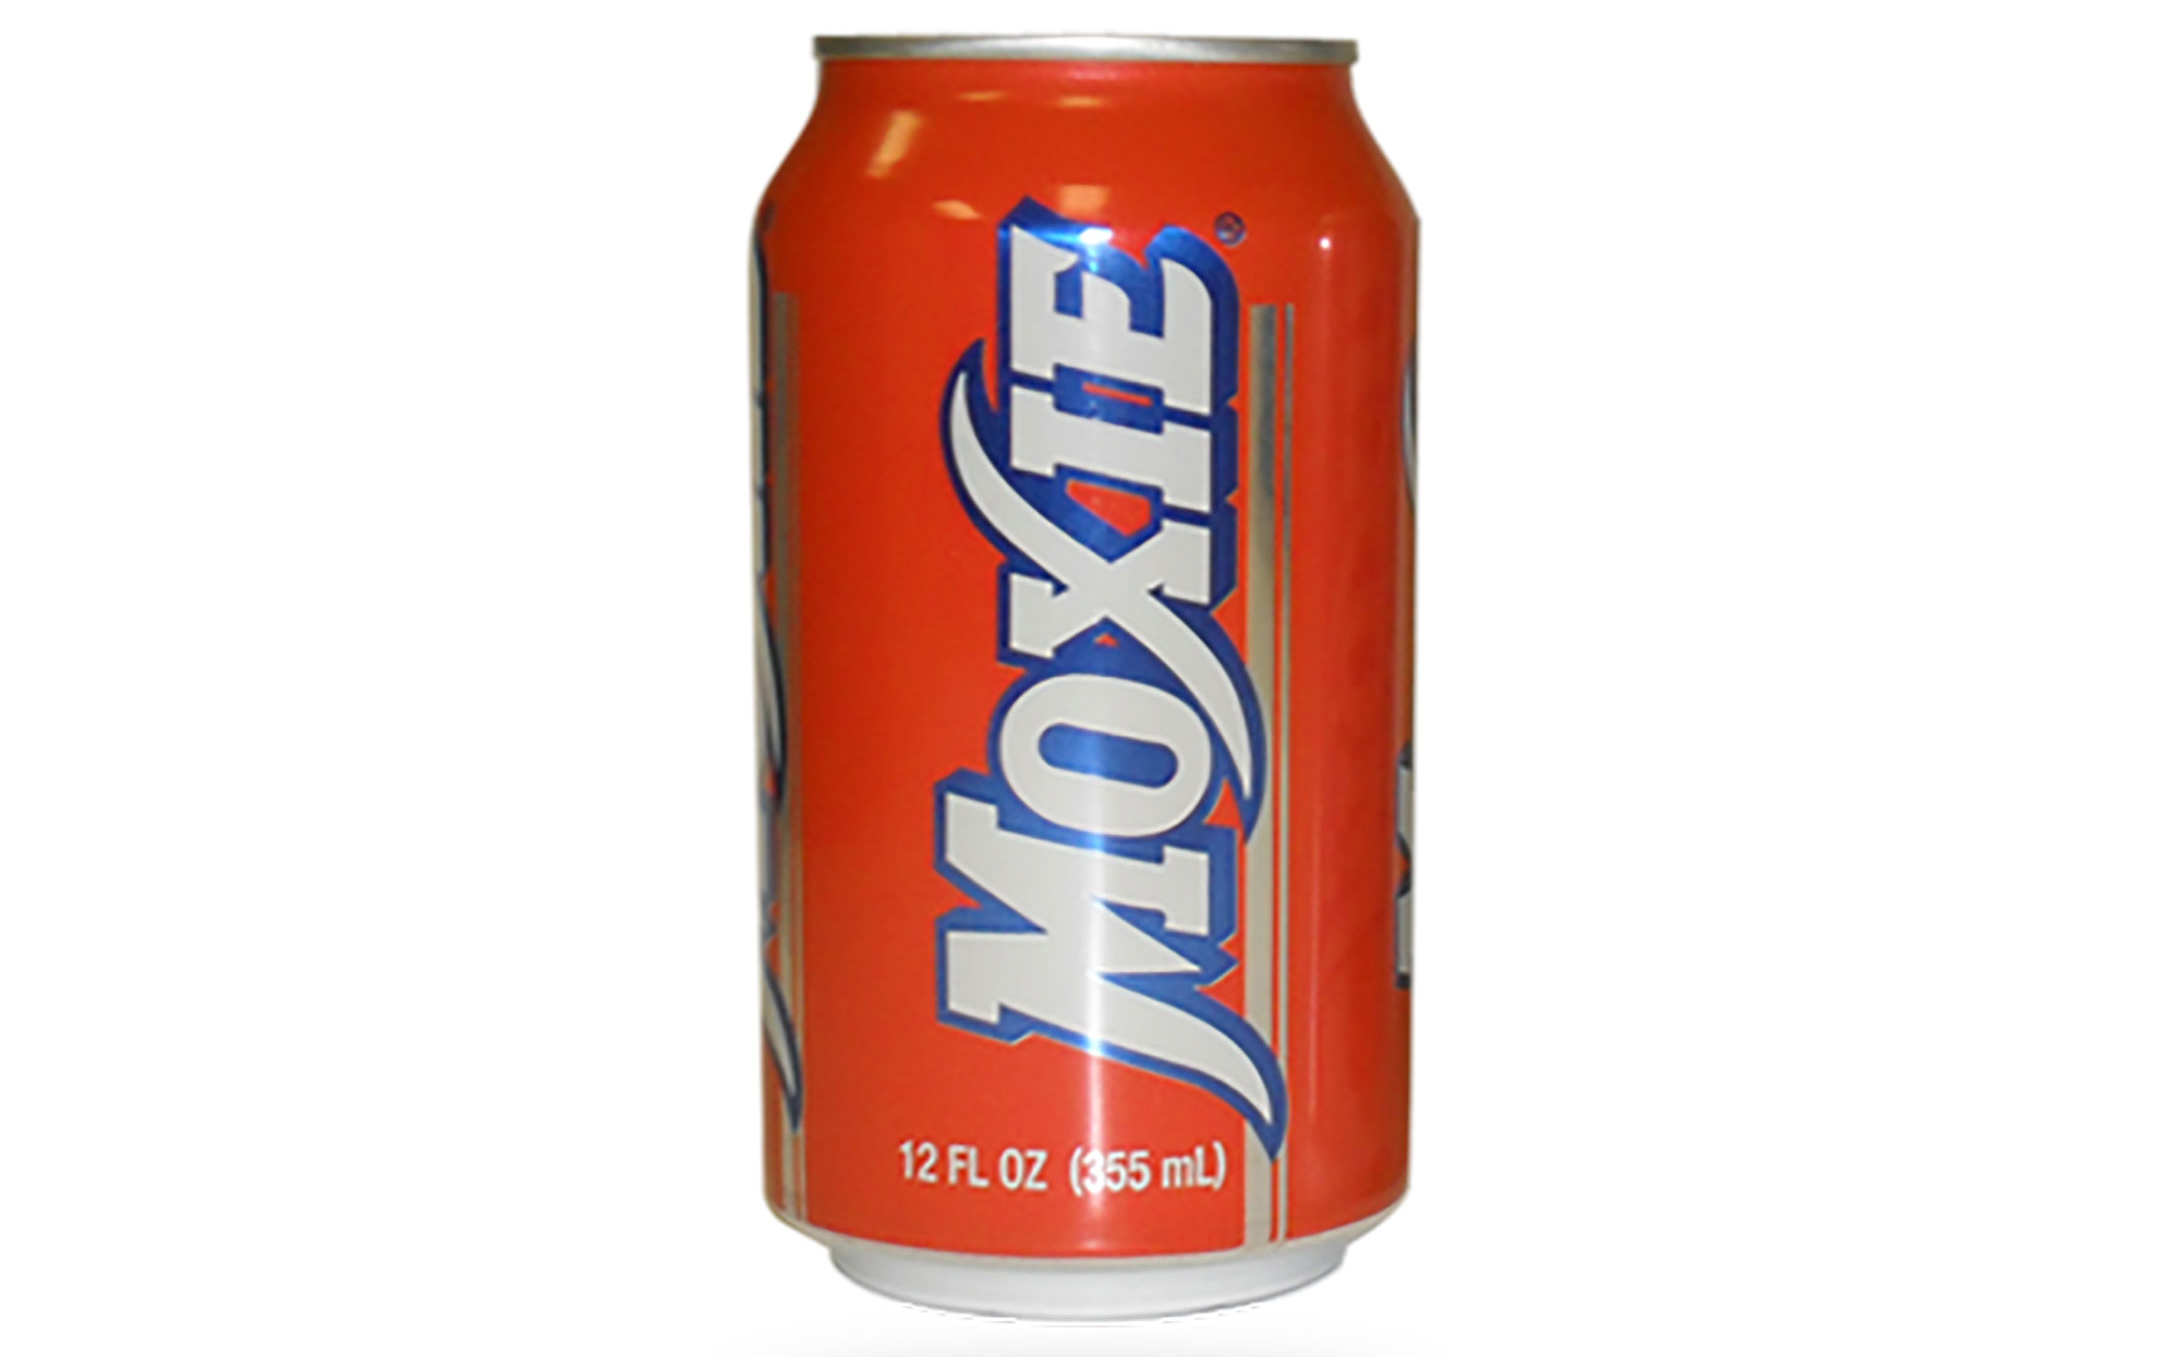 Maine's Moxie Brand Sold To Coca-Cola In New England